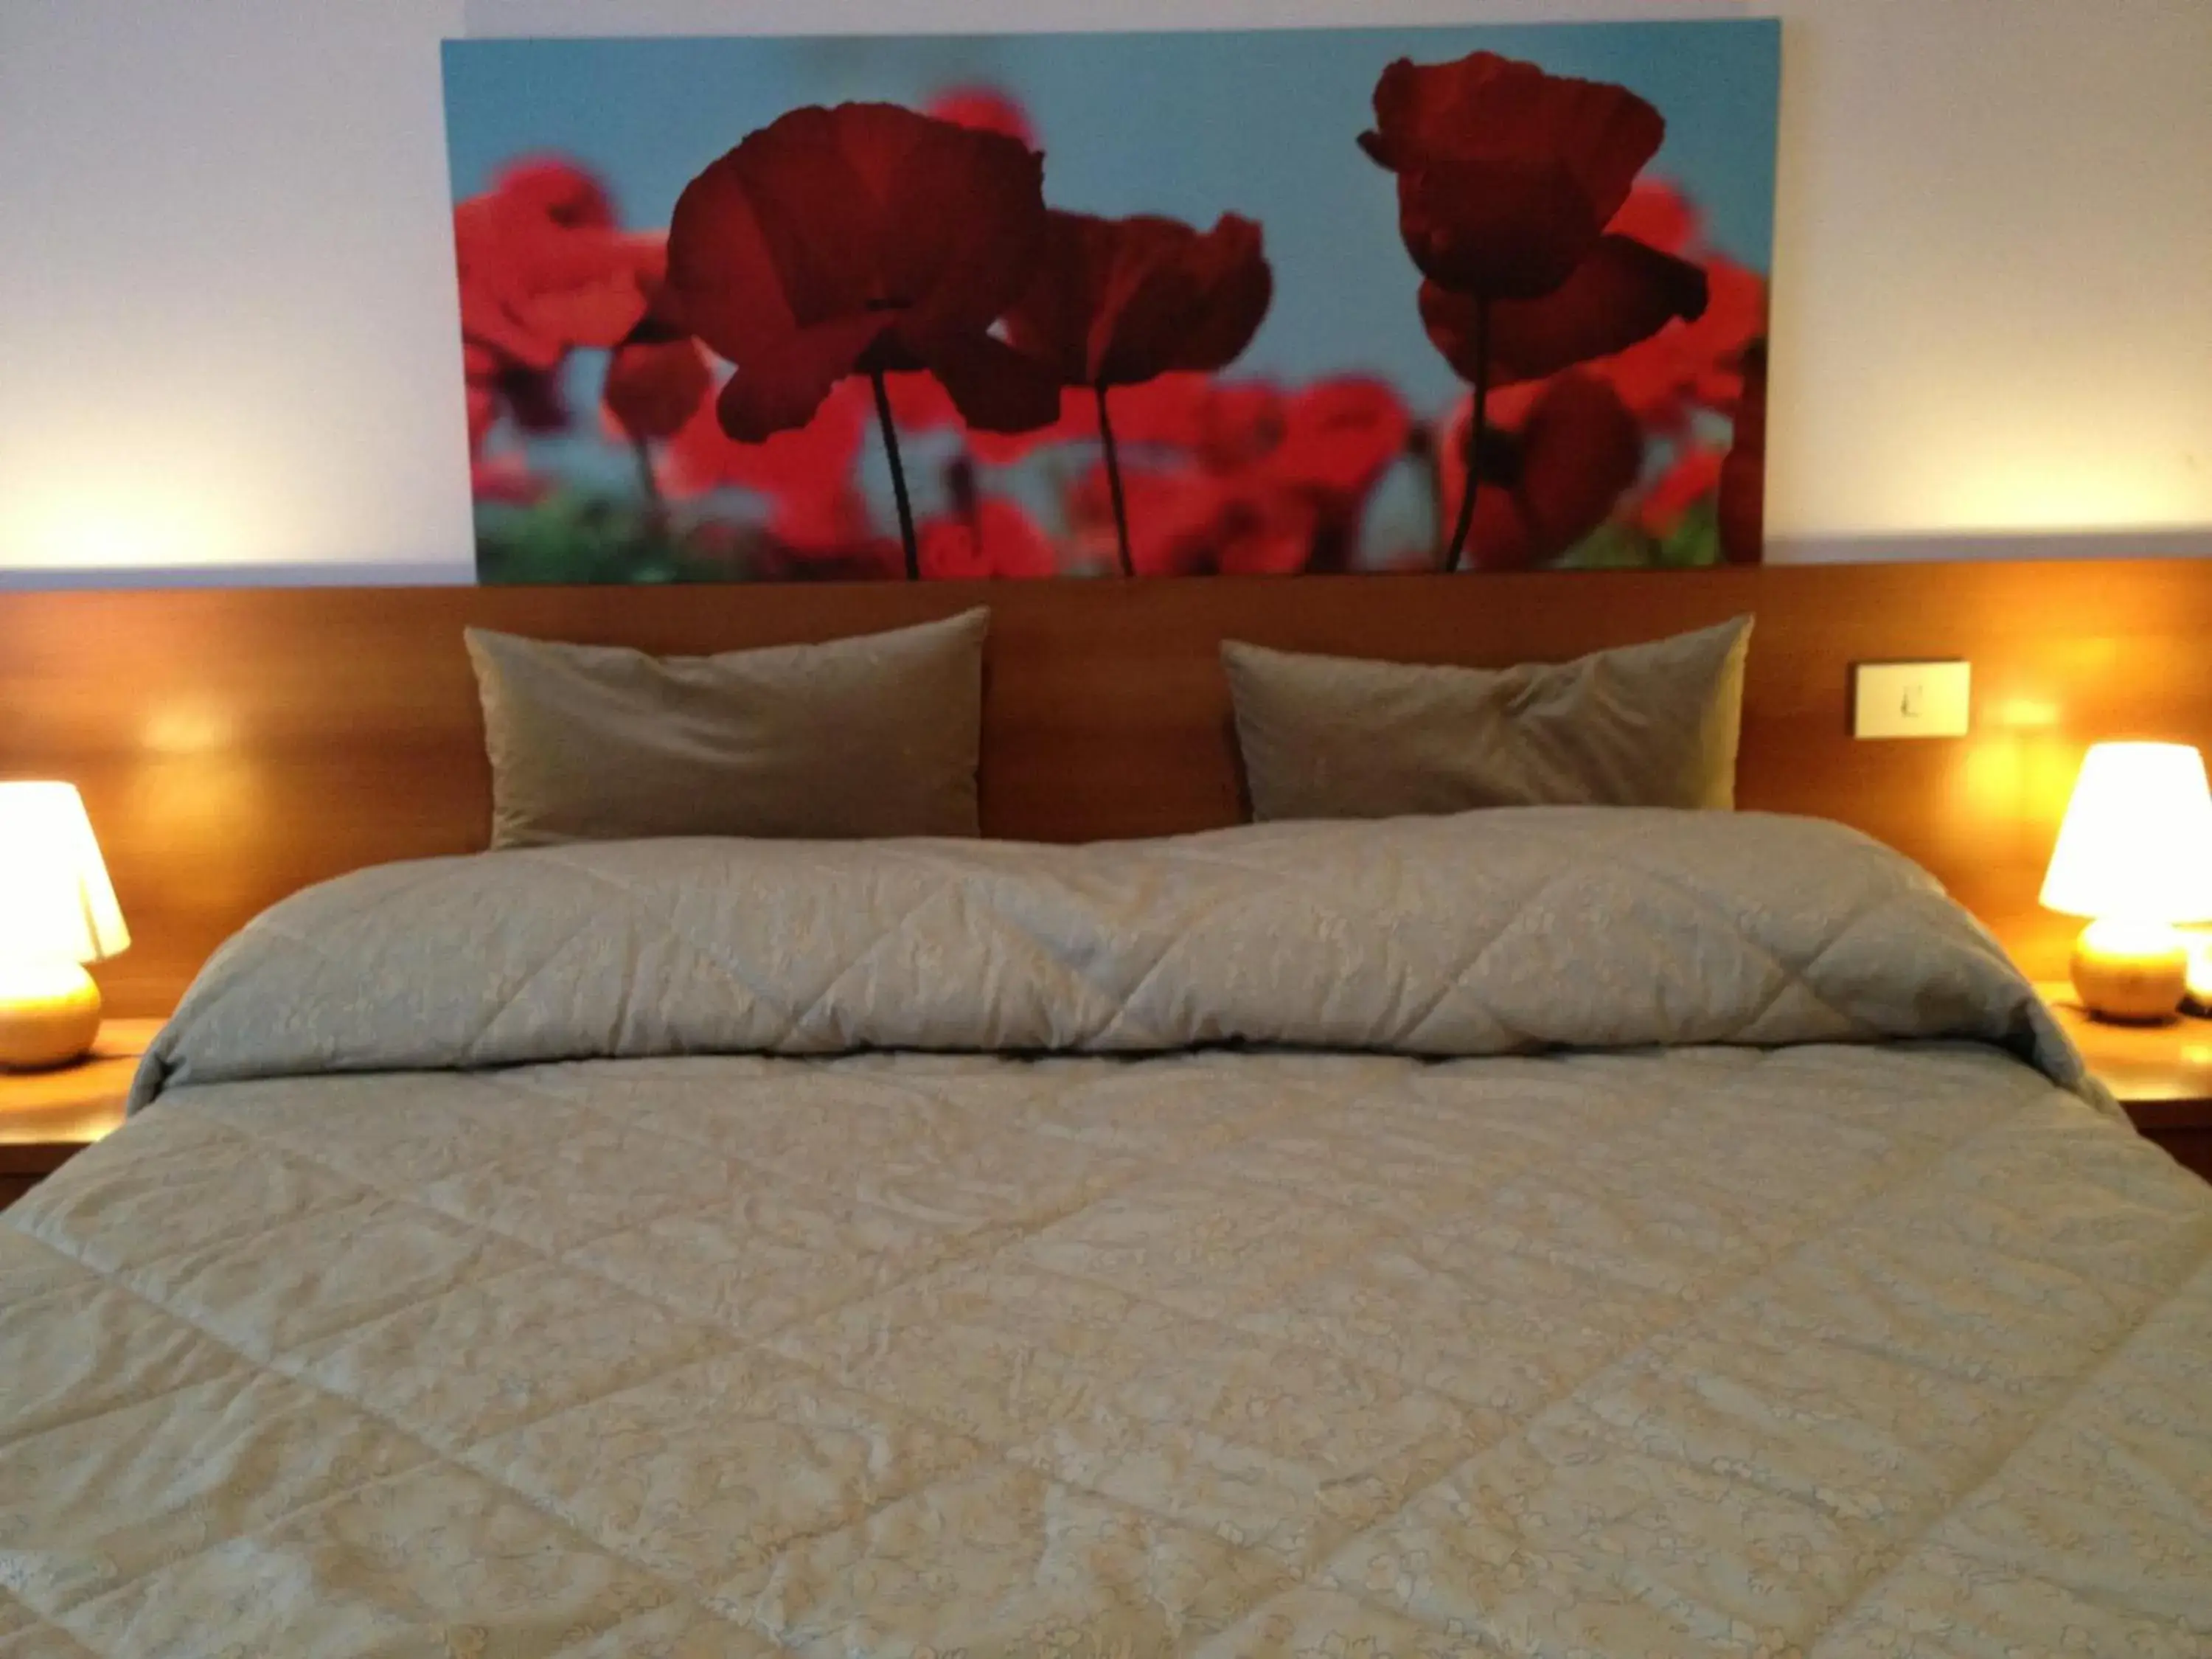 Bed in Hotel Indicatore Budget & Business At A Glance